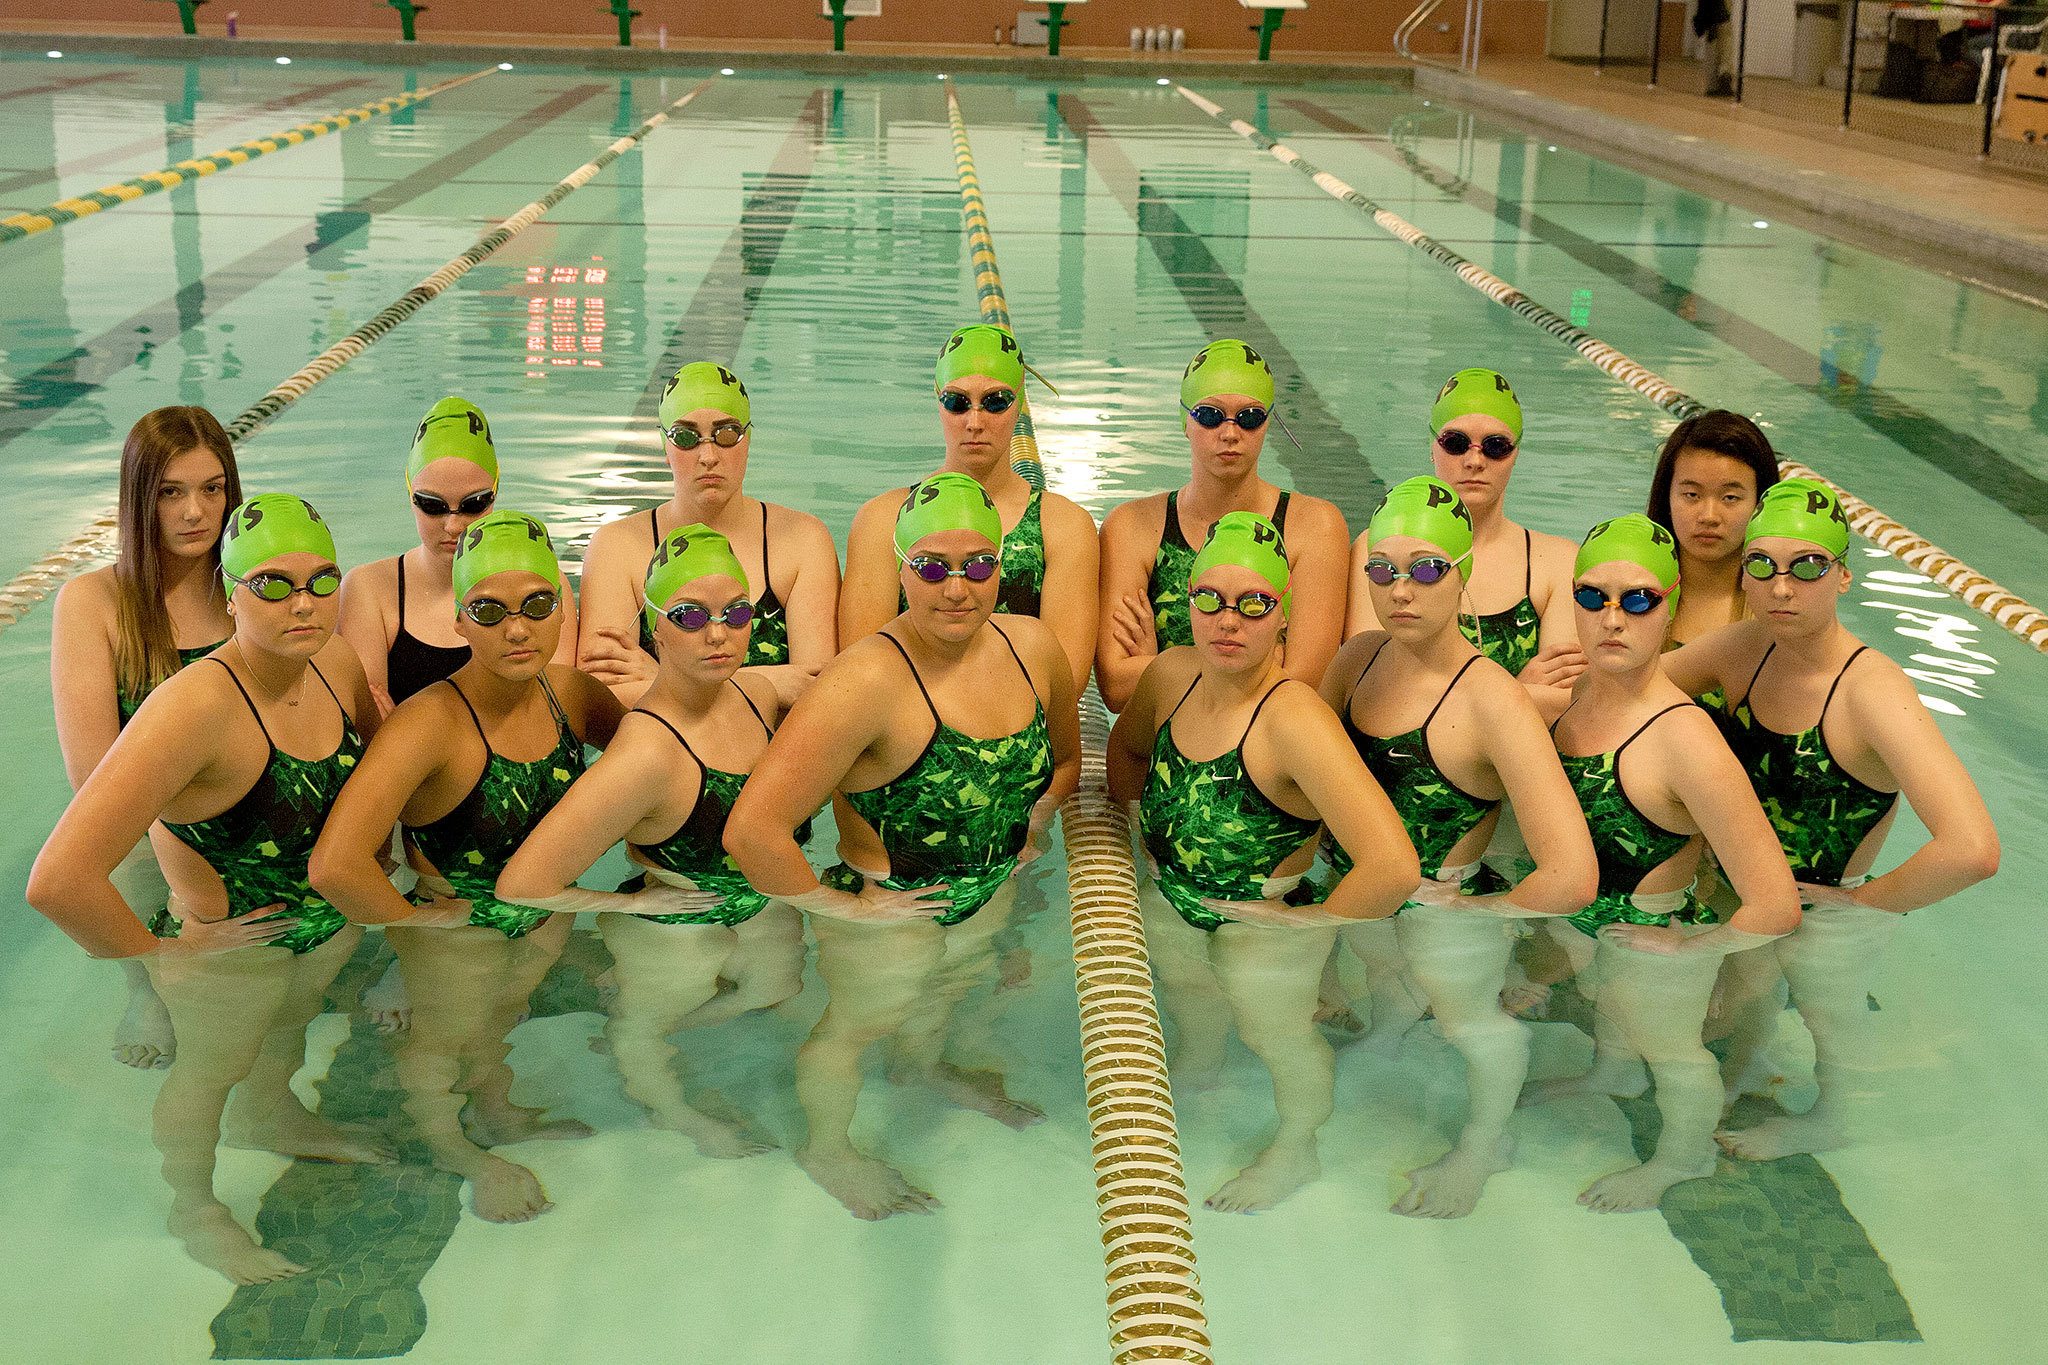 Port Angeles High School photo                                The Port Angeles girls swim and dive team, winners of the West Central 2A District, will be sending a contingent of 18 competitors to the 2A State Swim and Diving Championships at the King County Aquatic Center in Federal Way, which begins at 9:45 a.m. Friday with preliminary heats. Final heats will begin at 9:30 a.m. Saturday.